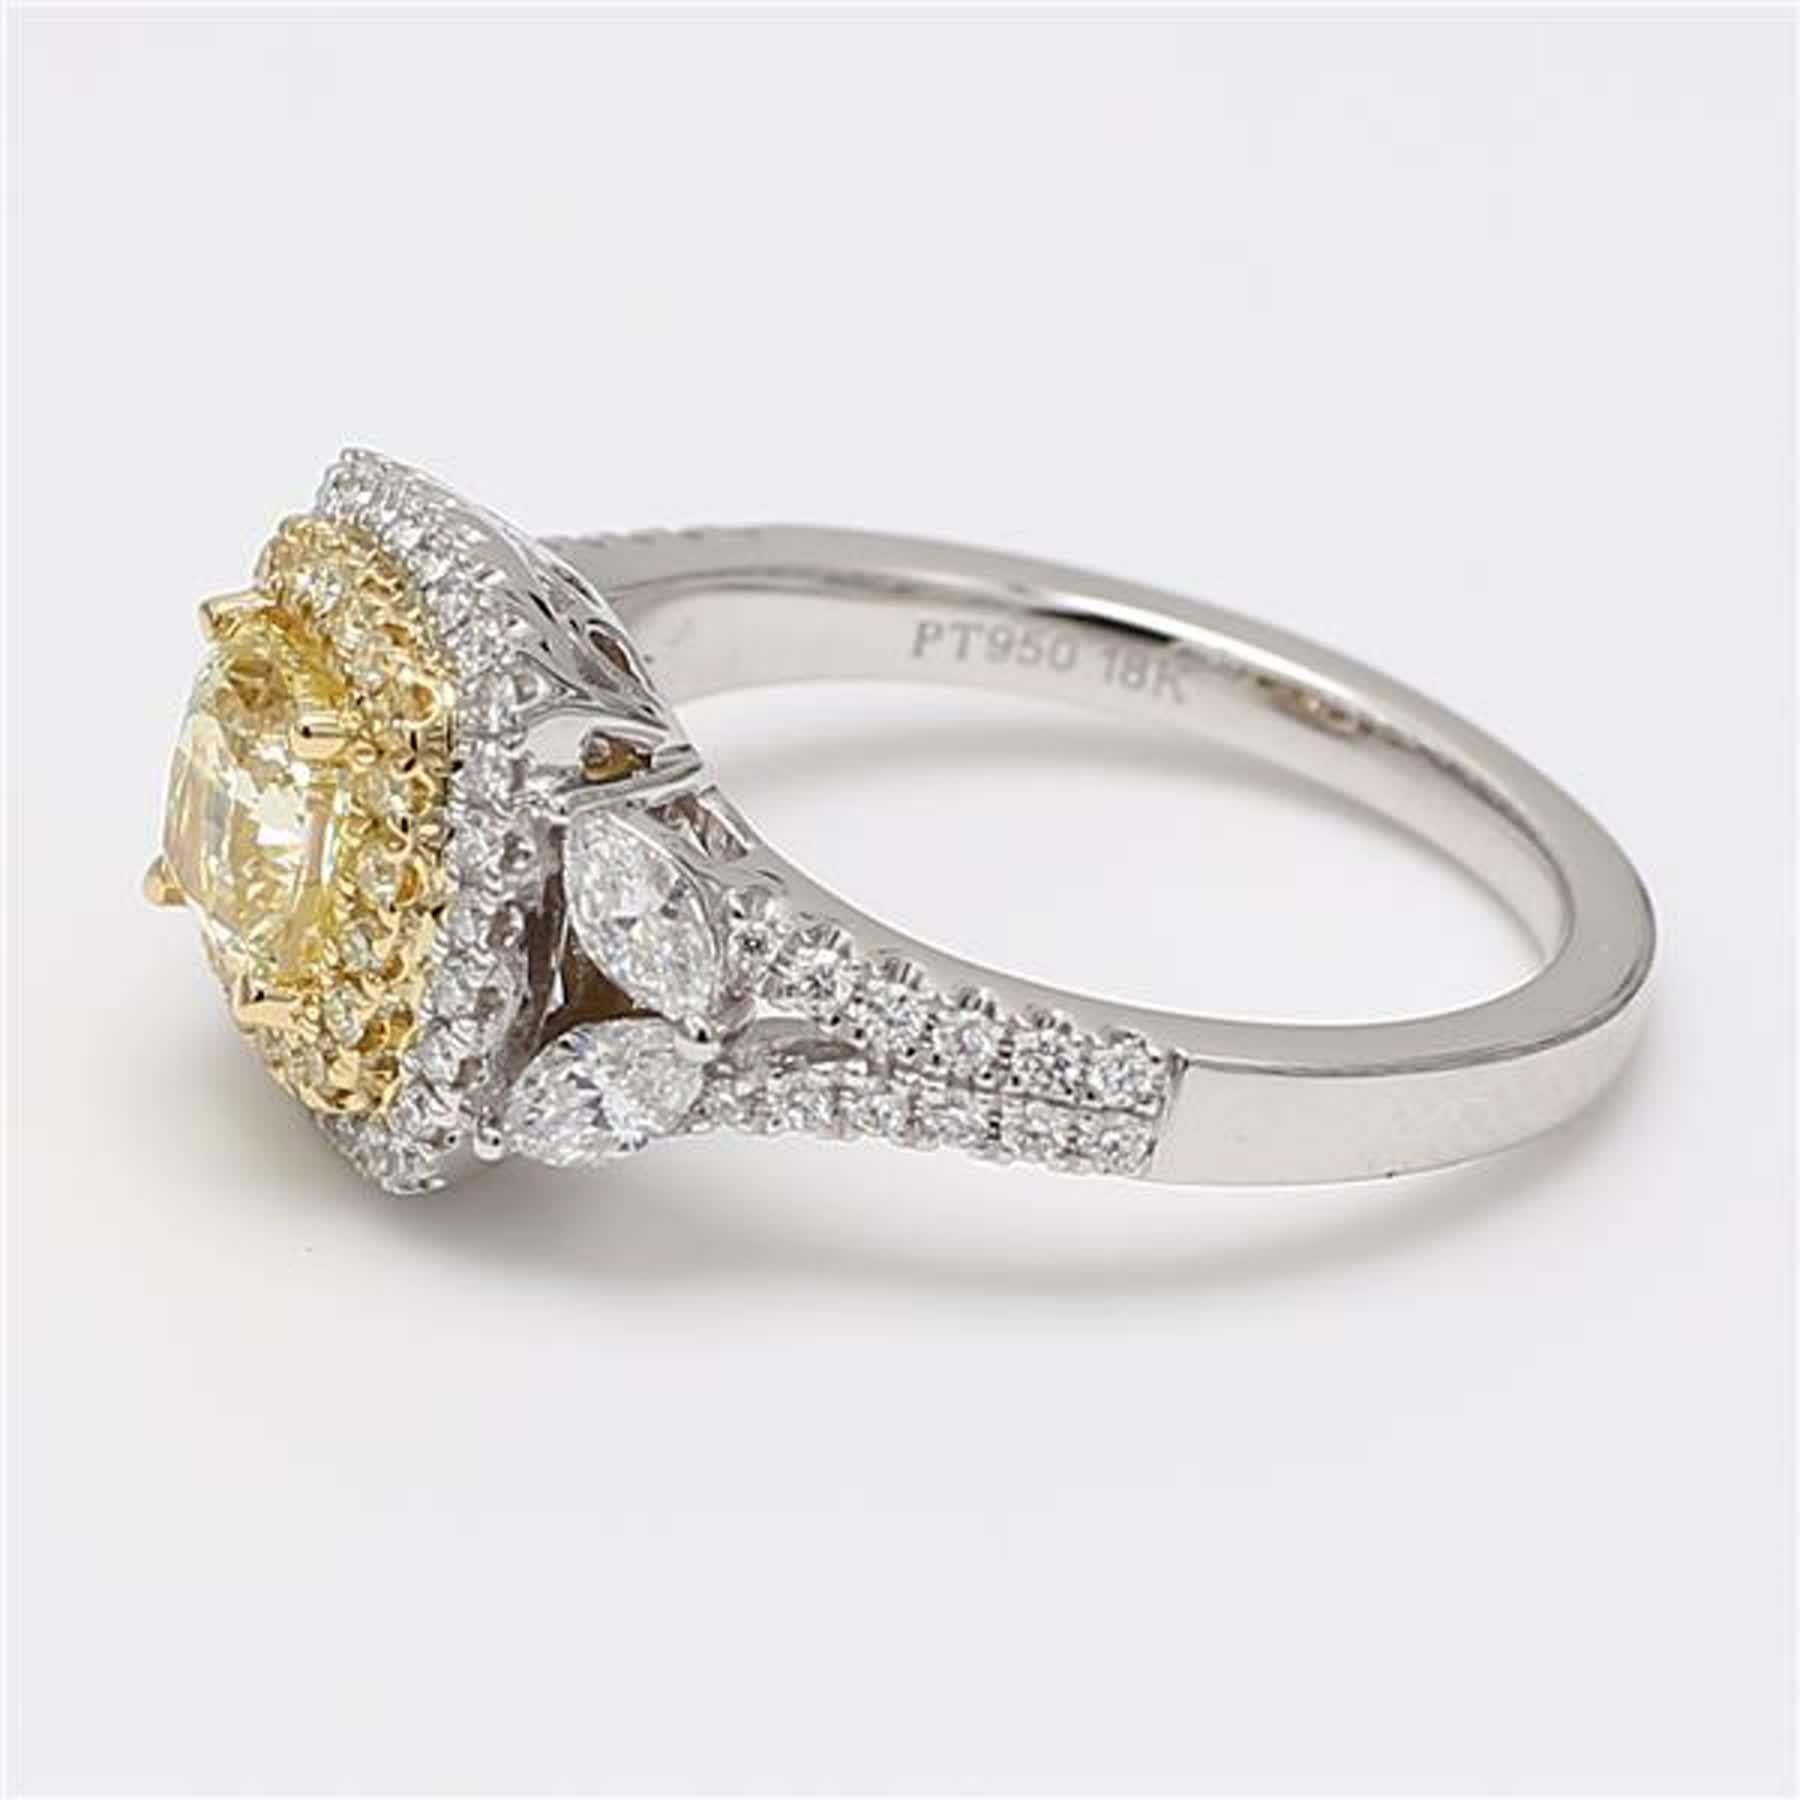 Contemporary GIA Certified Natural Yellow Cushion and White Diamond 1.72 Carat TW Plat Ring